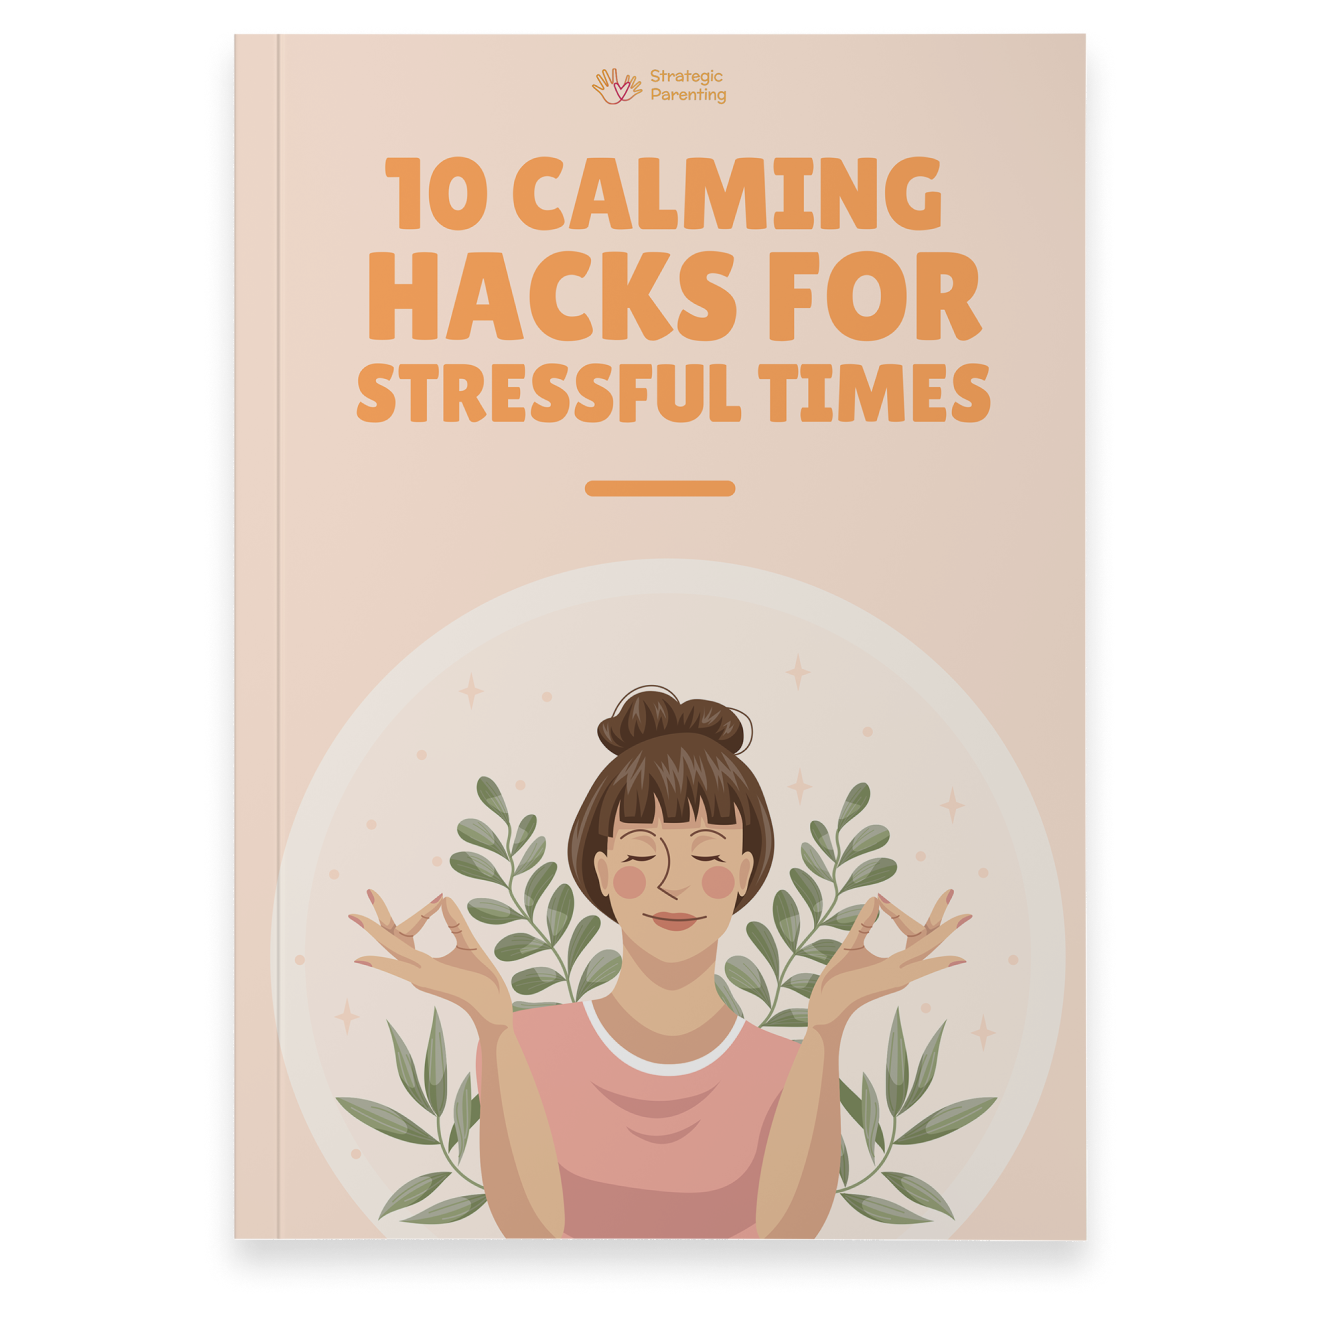 10 calming hacks for stressful times